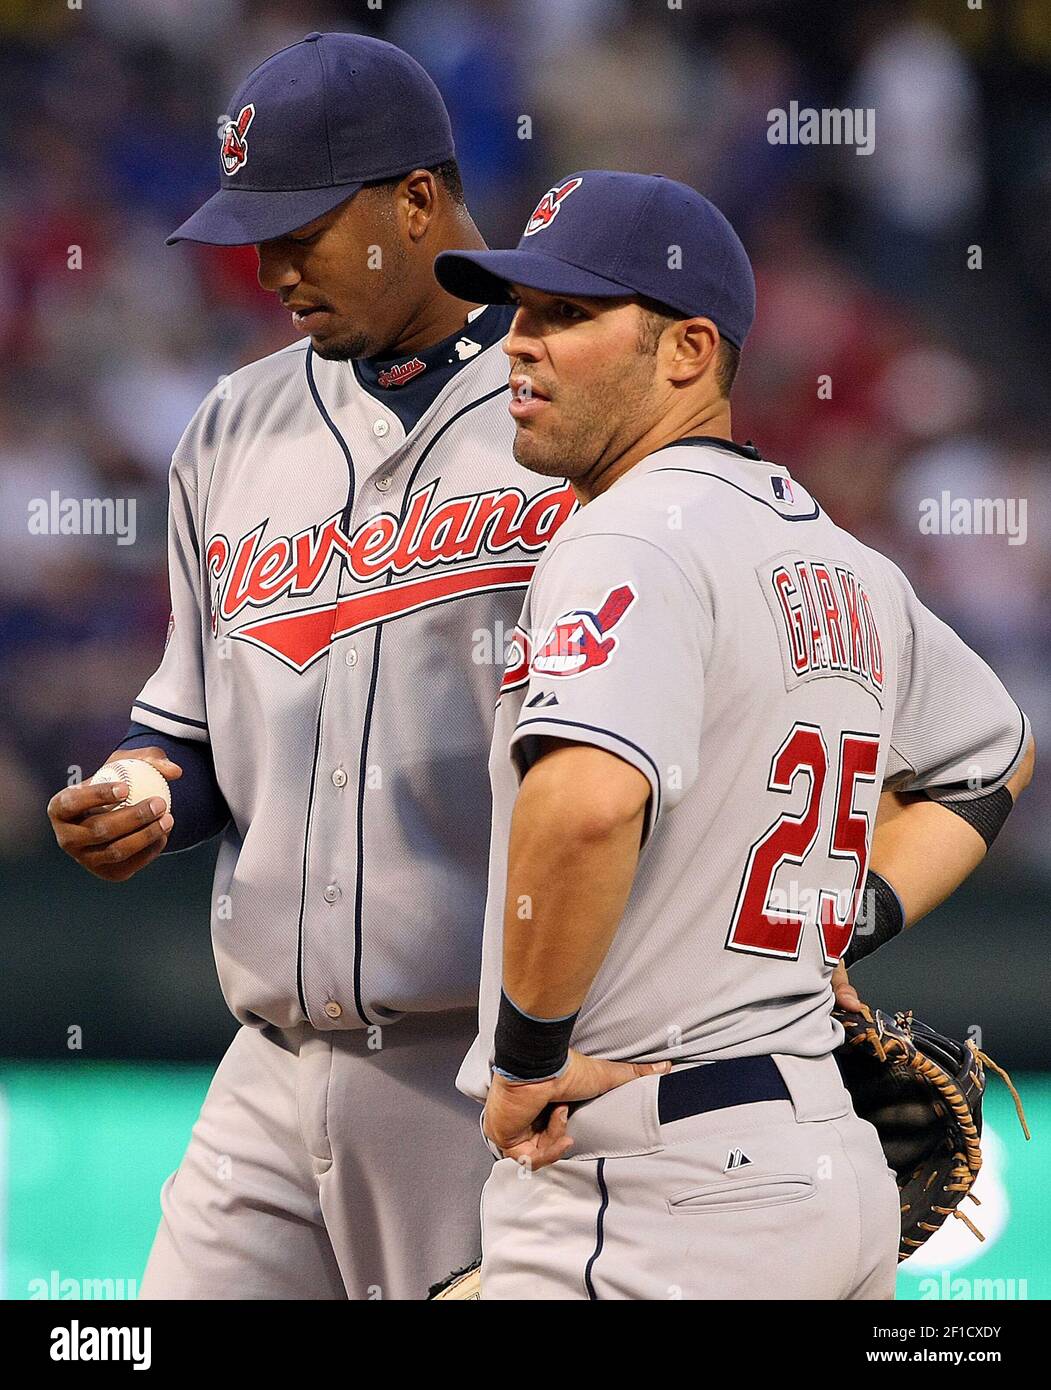 Starting pitcher Fausto Carmona of the Cleveland Indians, left, talks with first baseman Ryan Garko in the first inning against the Texas Rangers on Wednesday, April 8, 2009, in Arlington, Texas. (Photo by Ron Jenkins/Fort Worth Star-Telegram/MCT/Sipa USA) Stock Photo